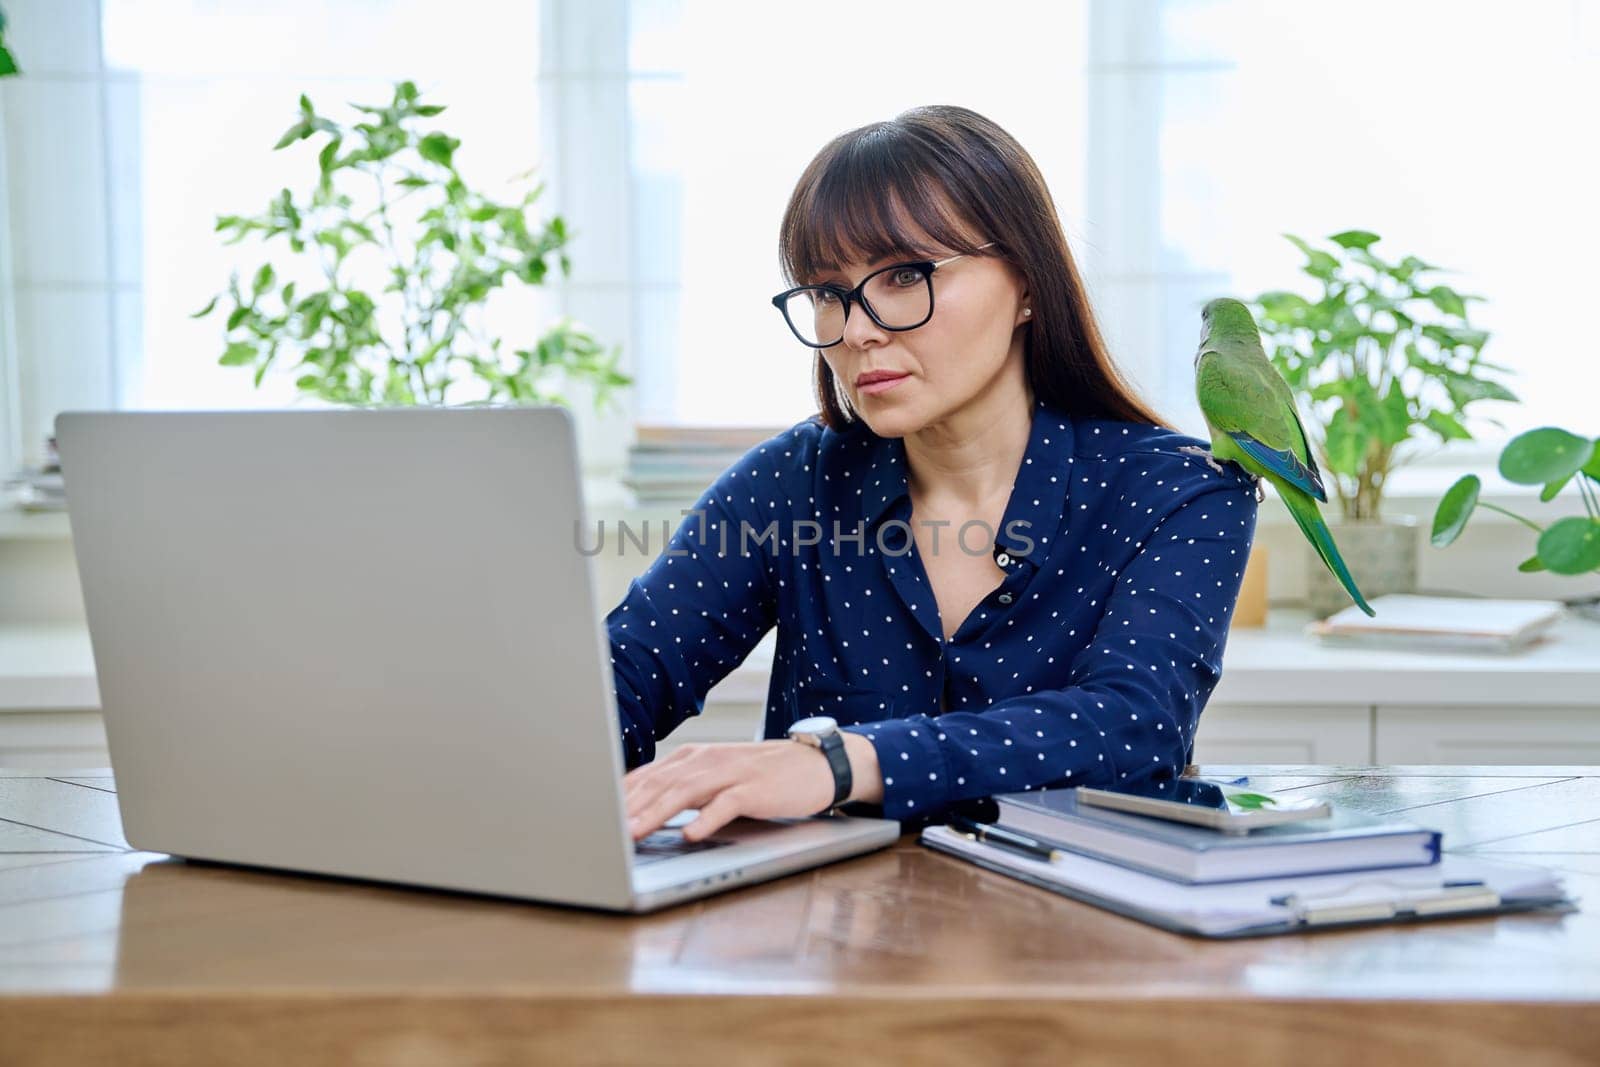 Middle aged woman sitting at workplace with computer in home office, holding pet with green quaker parrot on her shoulder. Work, lifestyle, pets, tropical birds